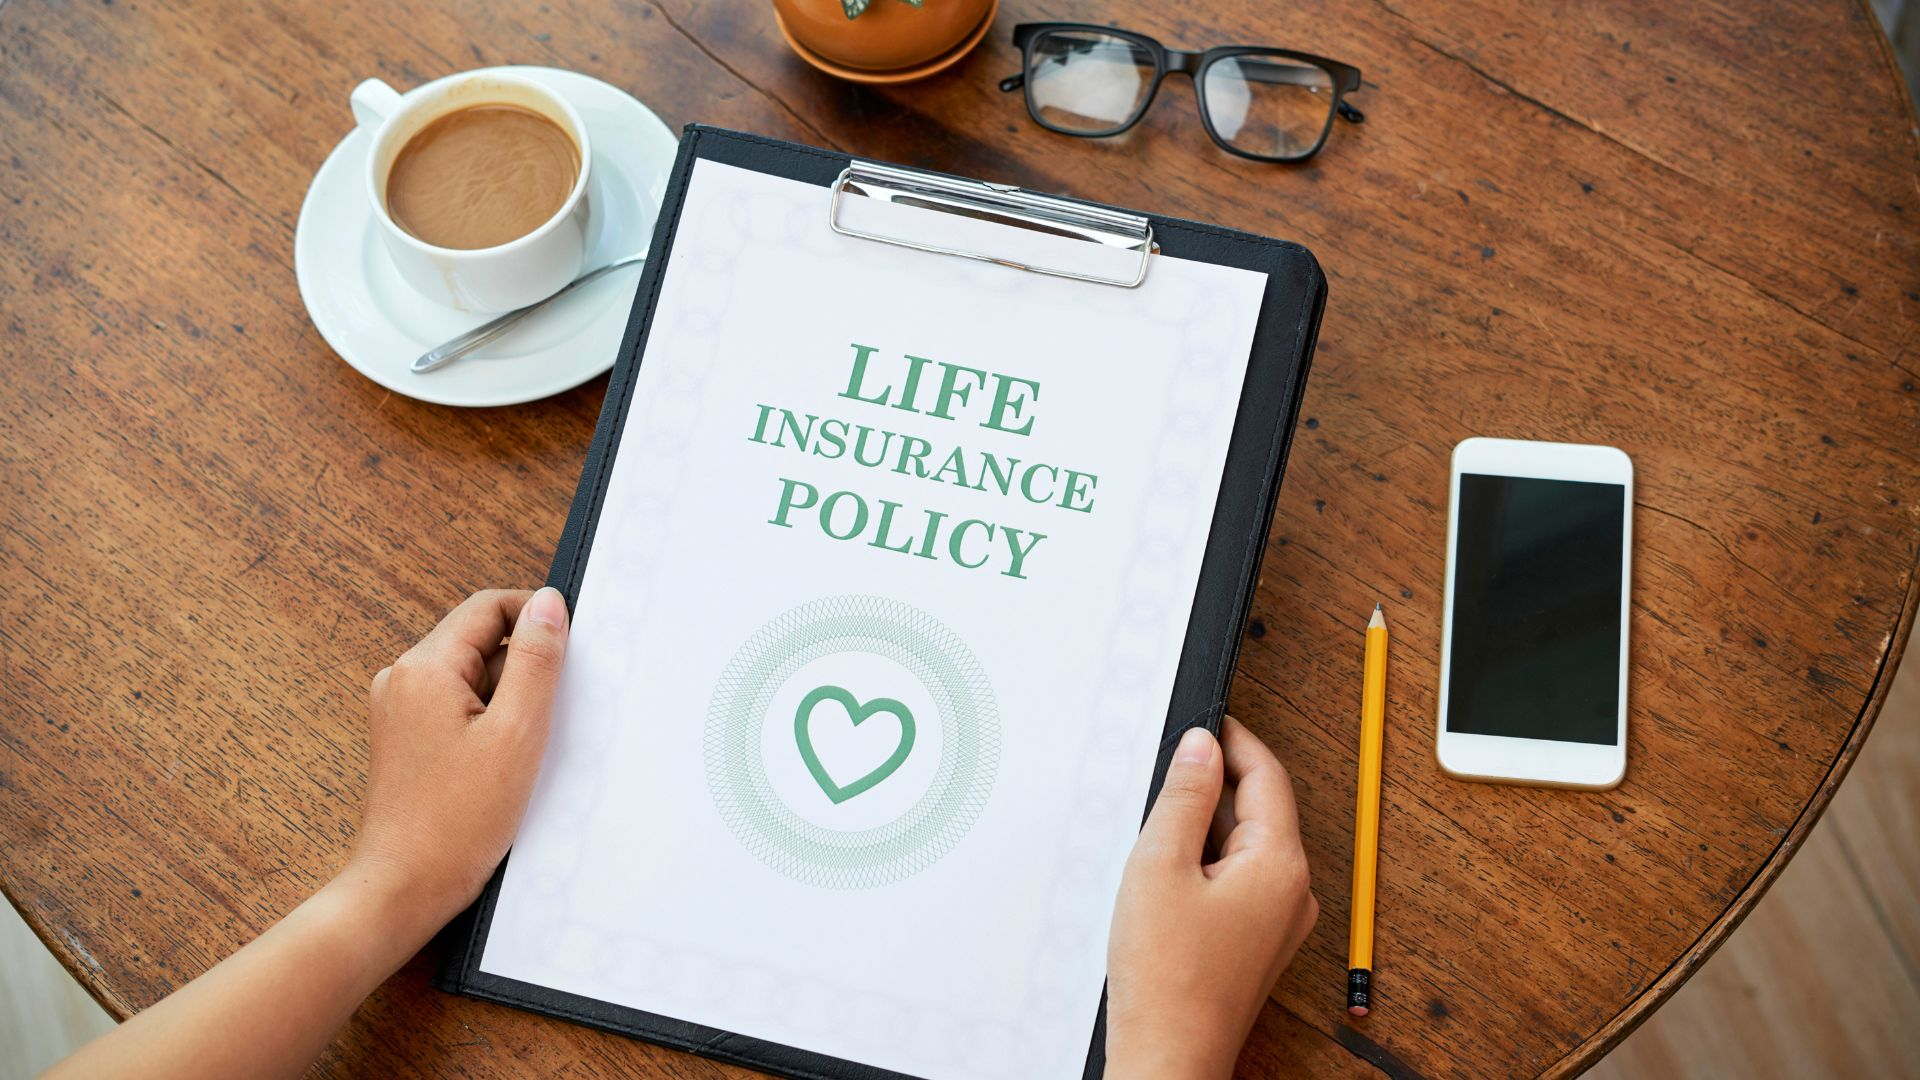 Life insurance policy document